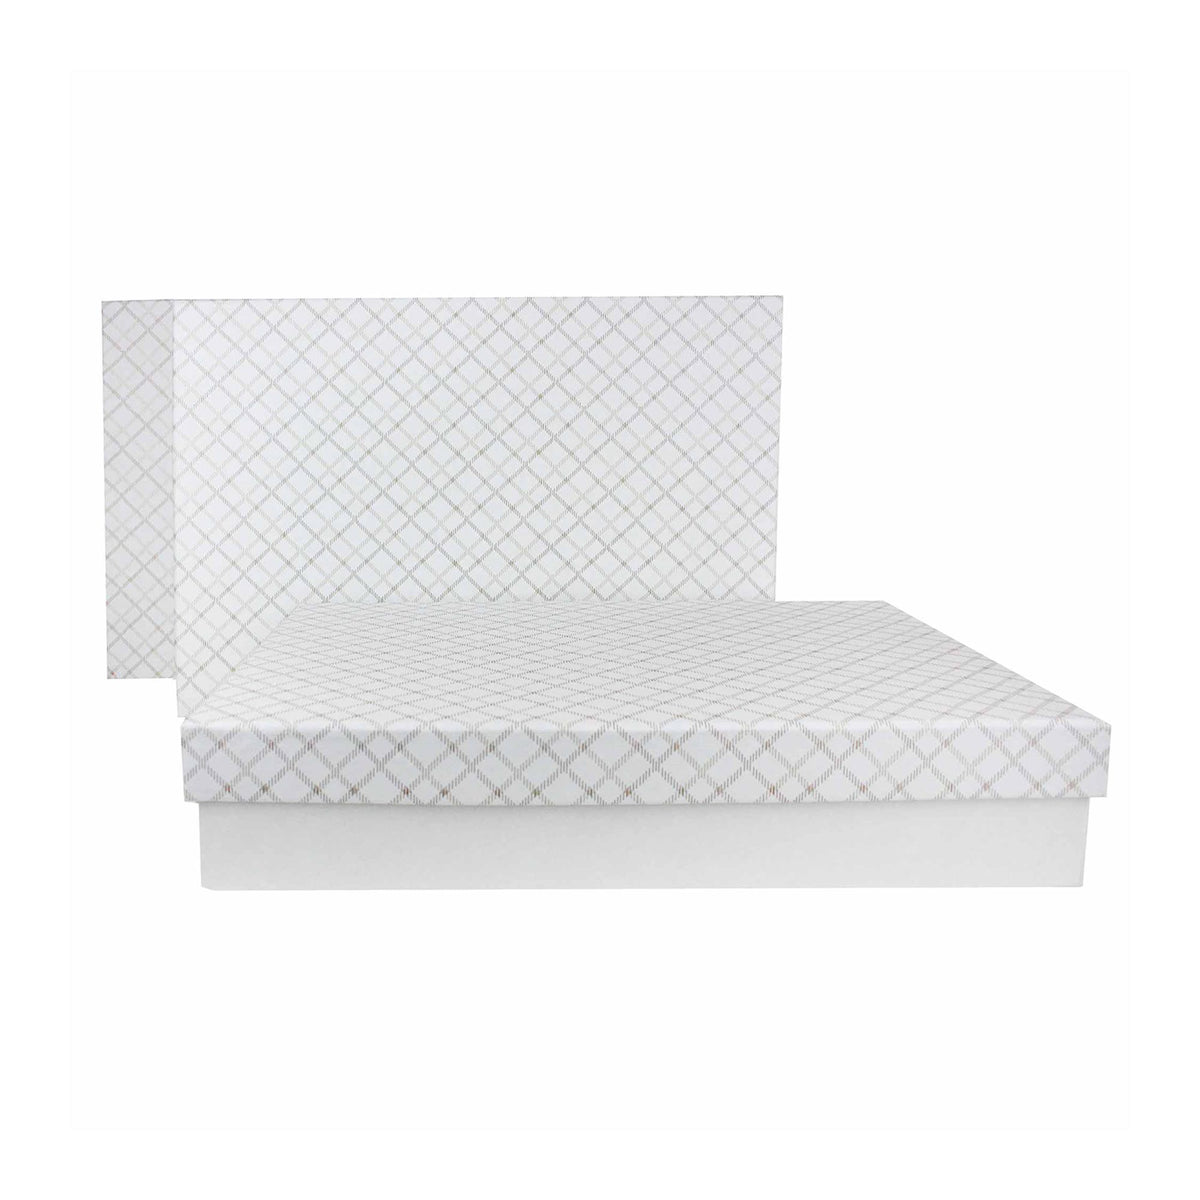 Set of 3 Handmade White Chequered Gift Boxes (Sizes Available)